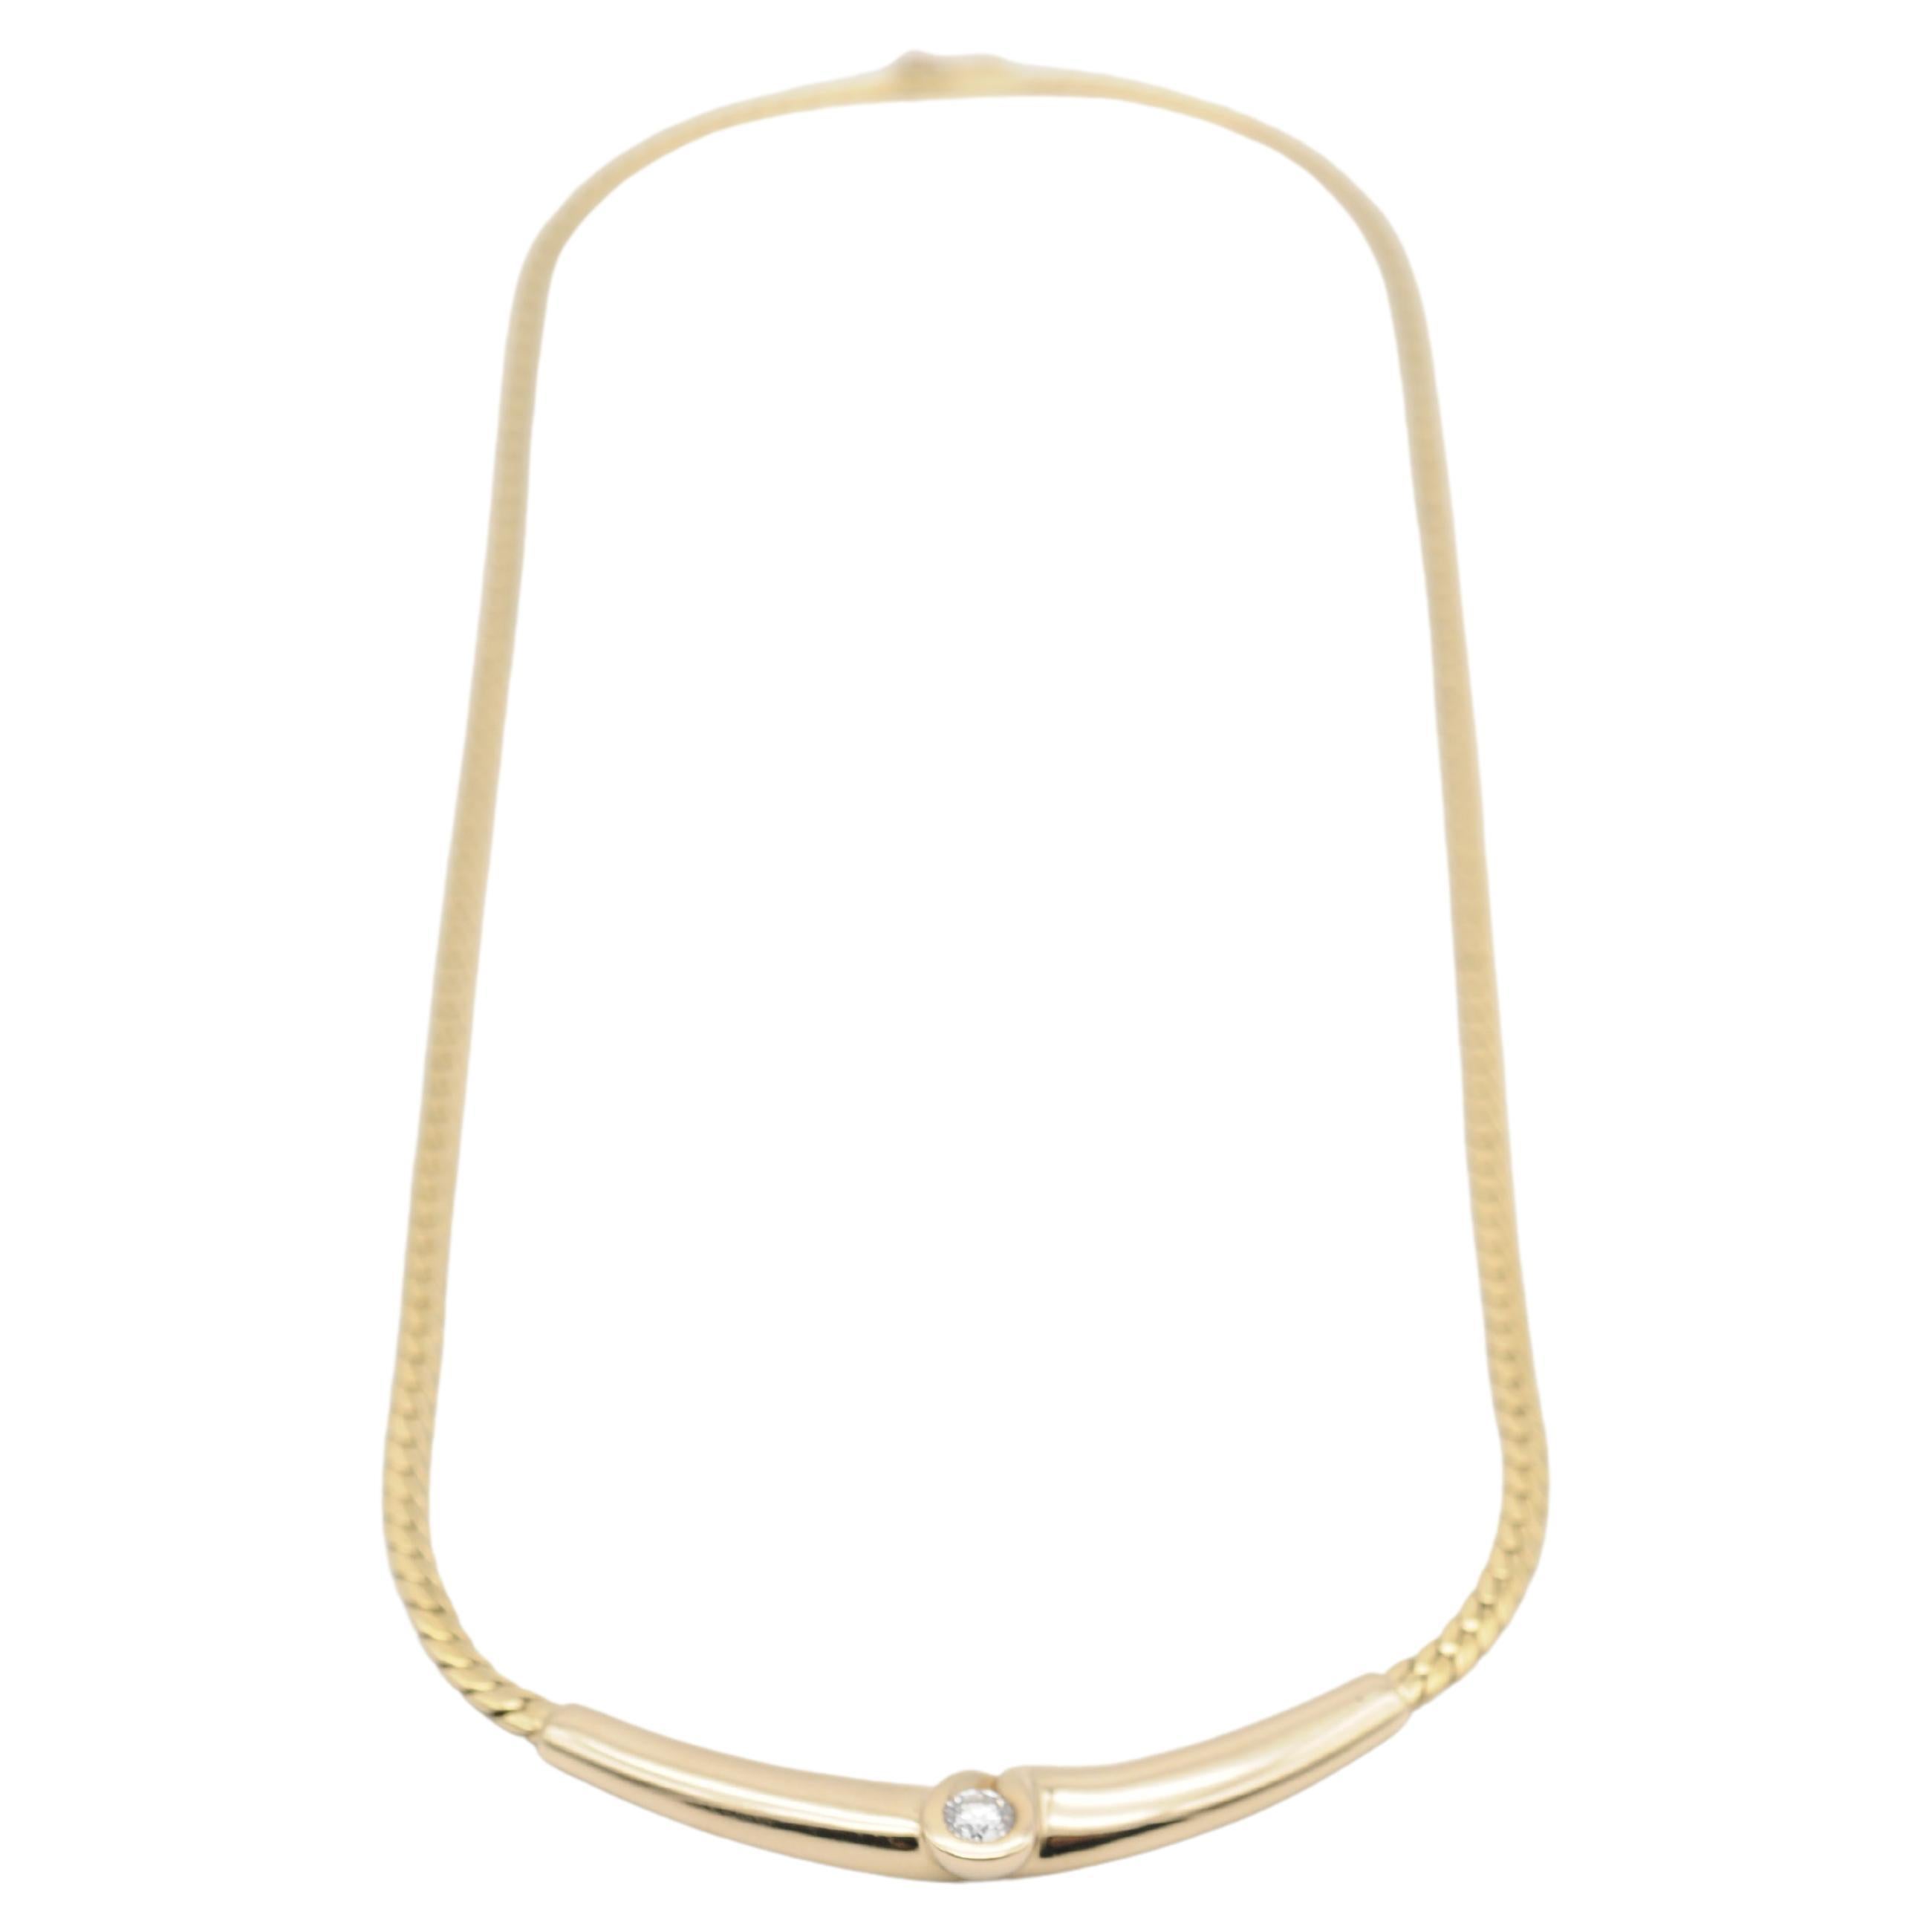 14K yellow gold necklace / necklace with solitaire 0.25 carat diamond